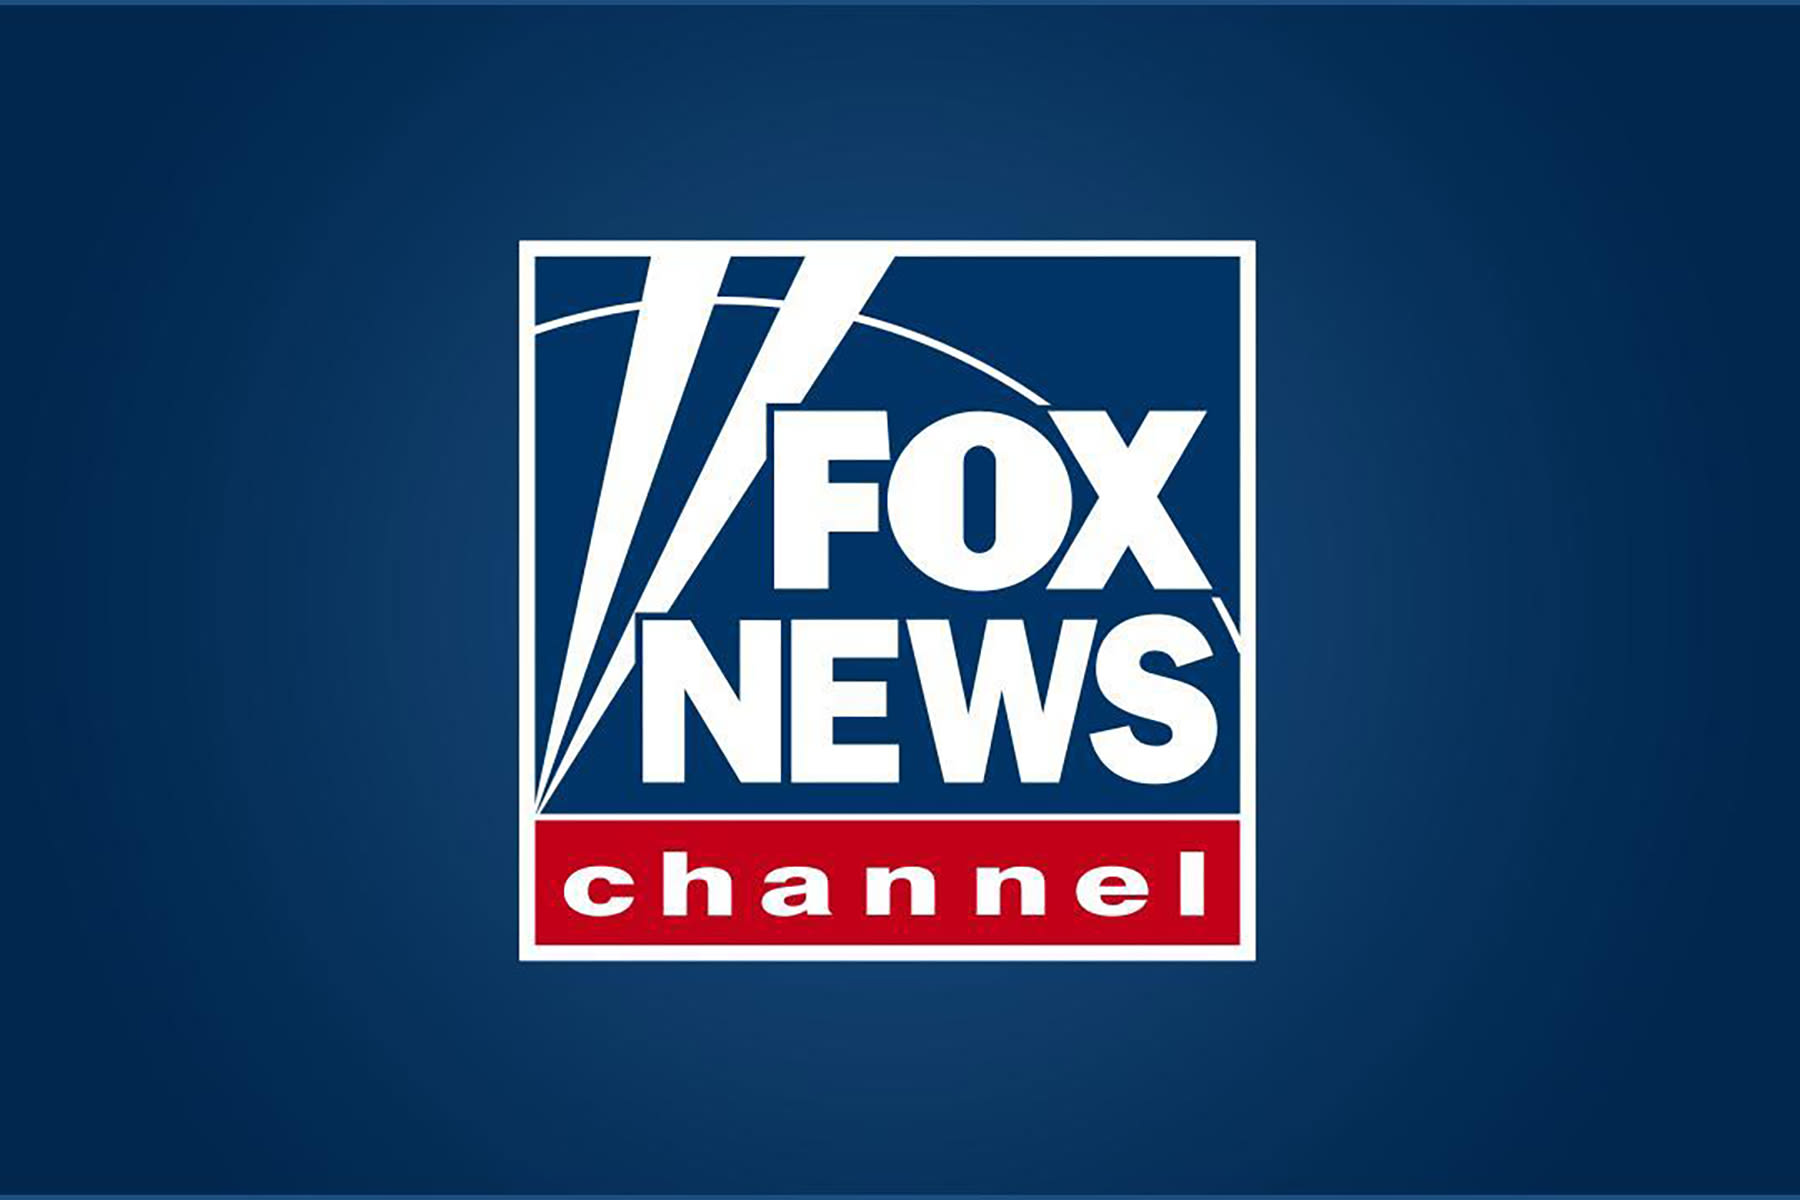 Fox News Livestream: How to Watch Fox News Online Without Cable